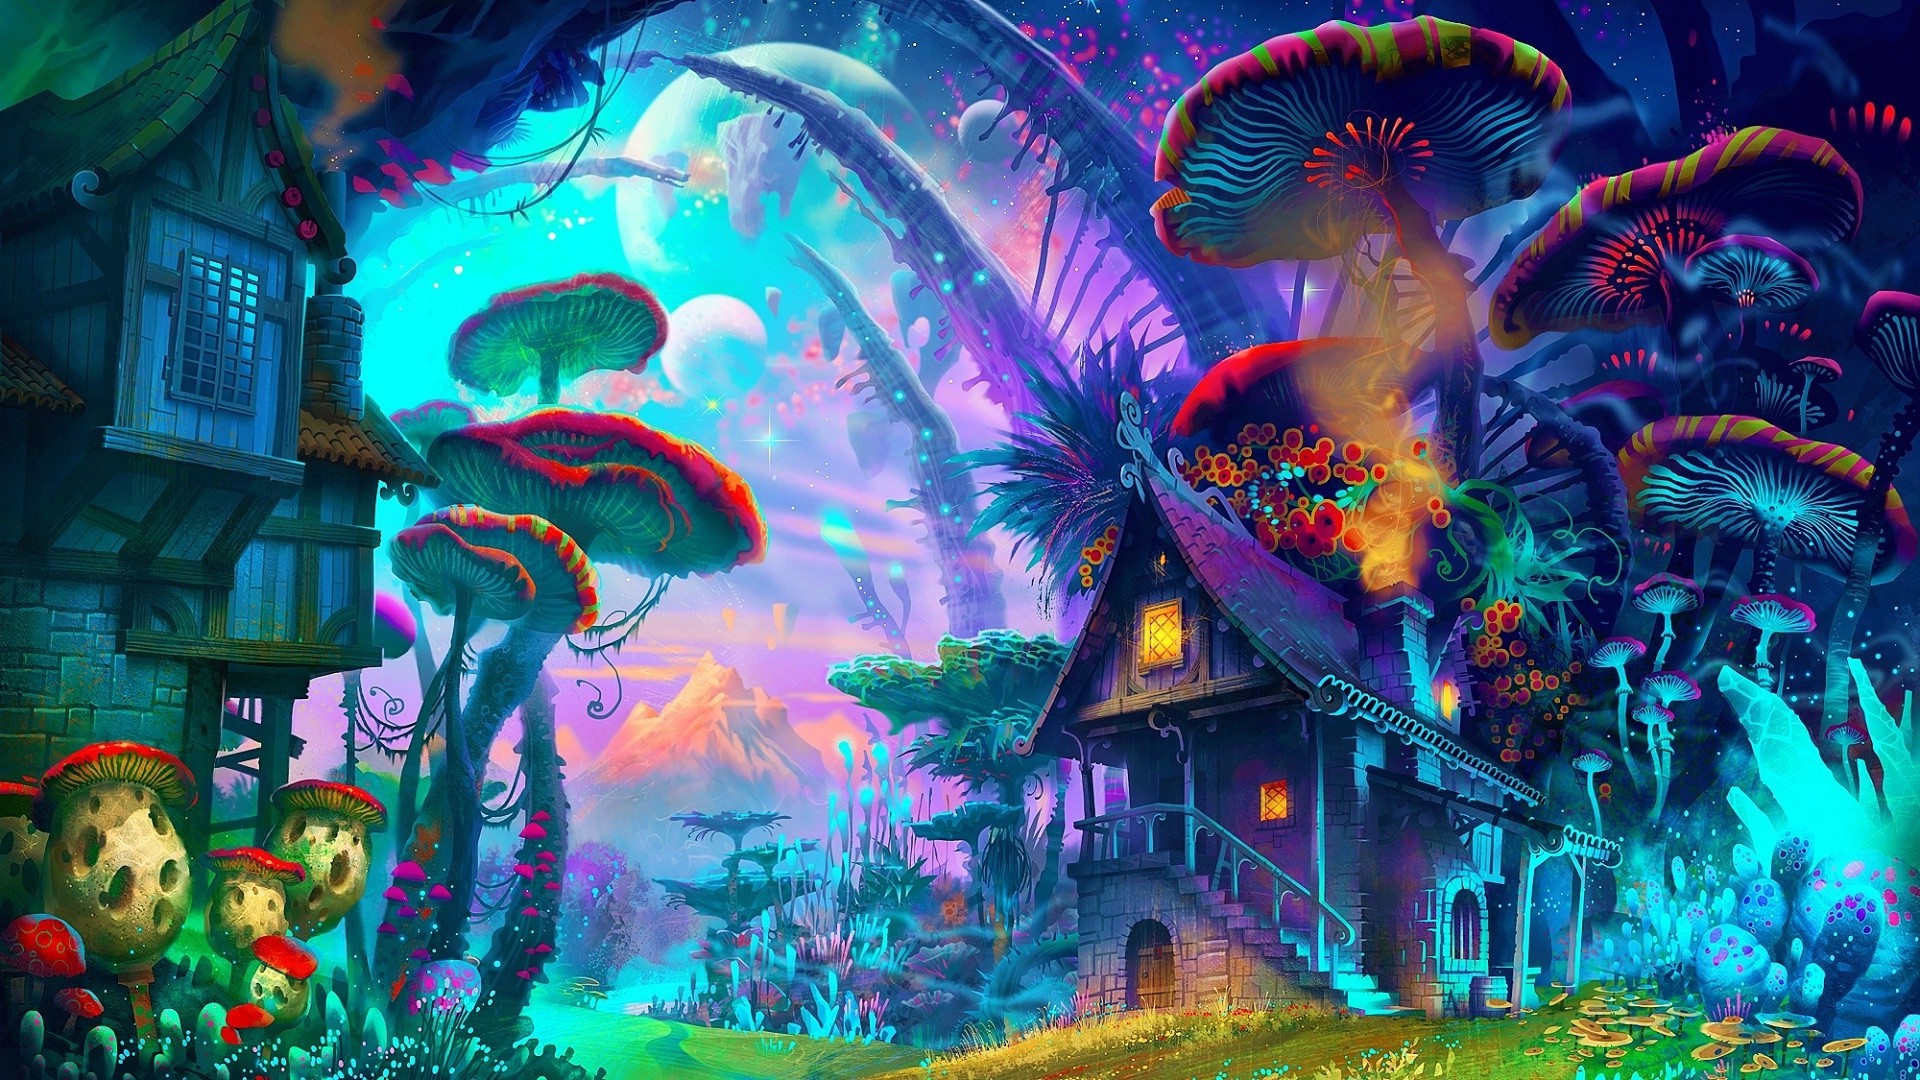 160755-fantasy_art-drawing-nature-psychedelic-colorful-house-mushroom-planet-plants-mountain.jpg